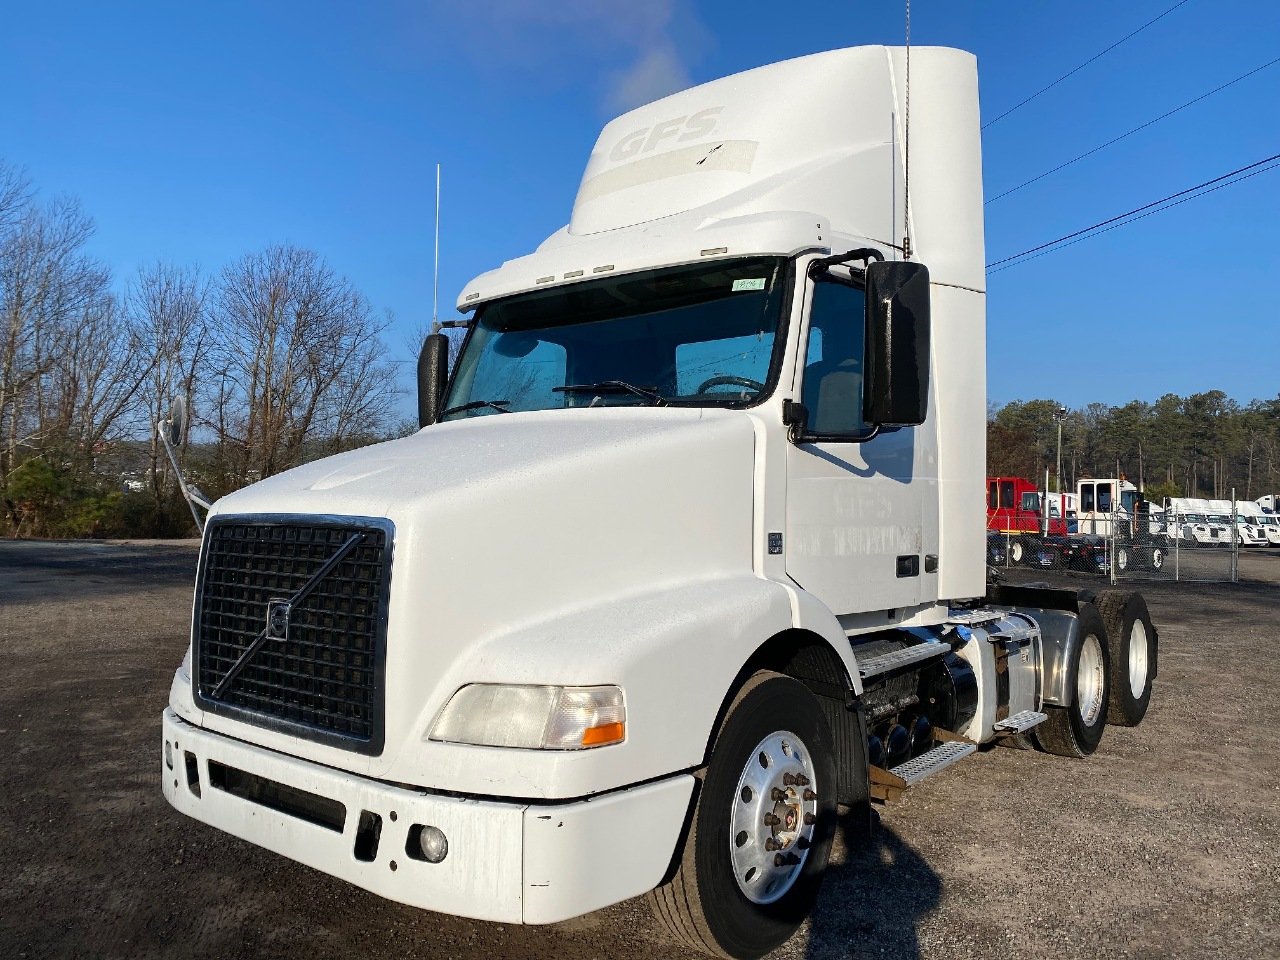 USED 2012 VOLVO VNM64T200 TANDEM AXLE DAYCAB TRUCK #15188